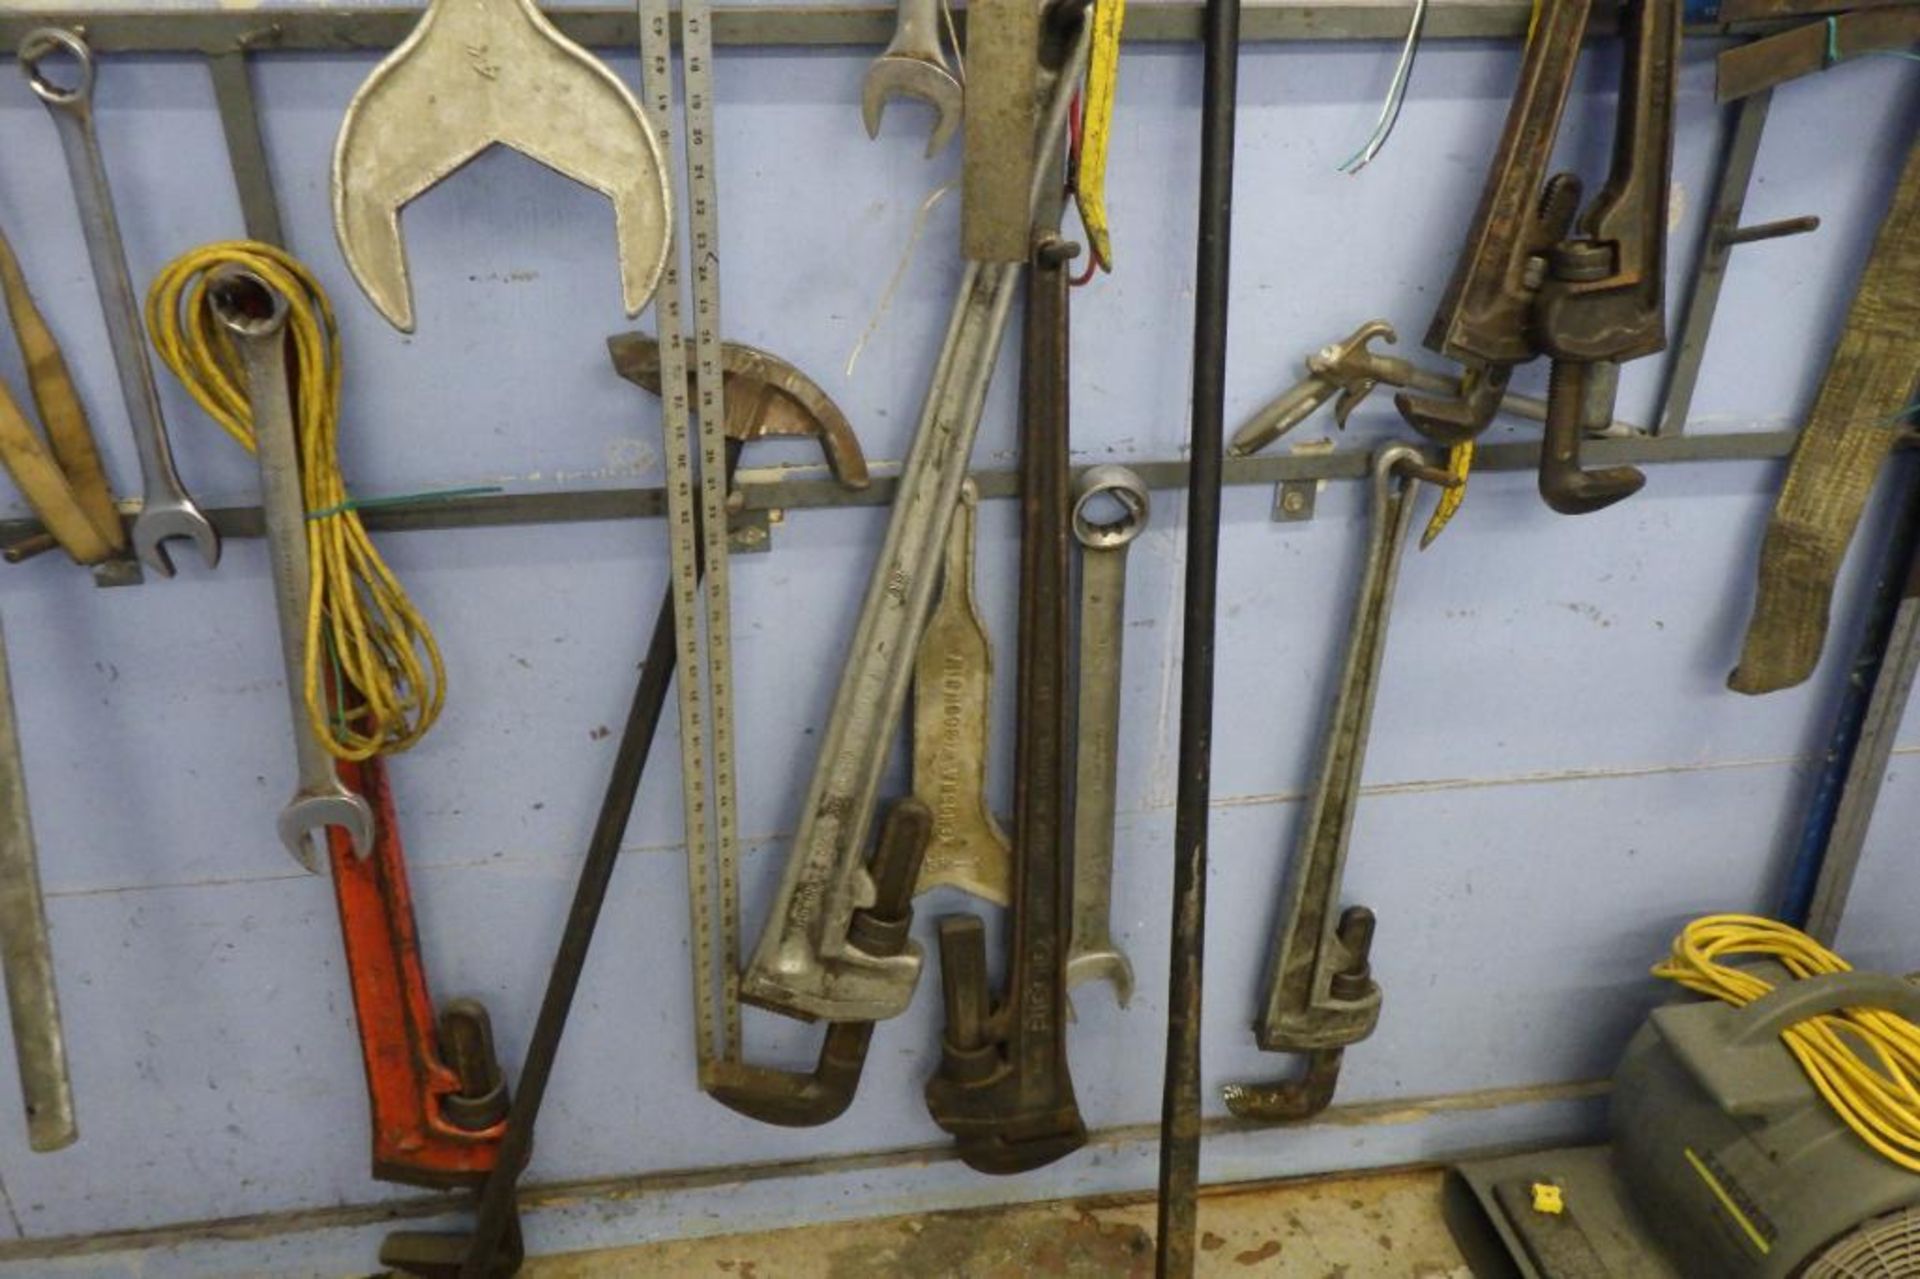 Assorted tools hanging on wall - Image 4 of 8